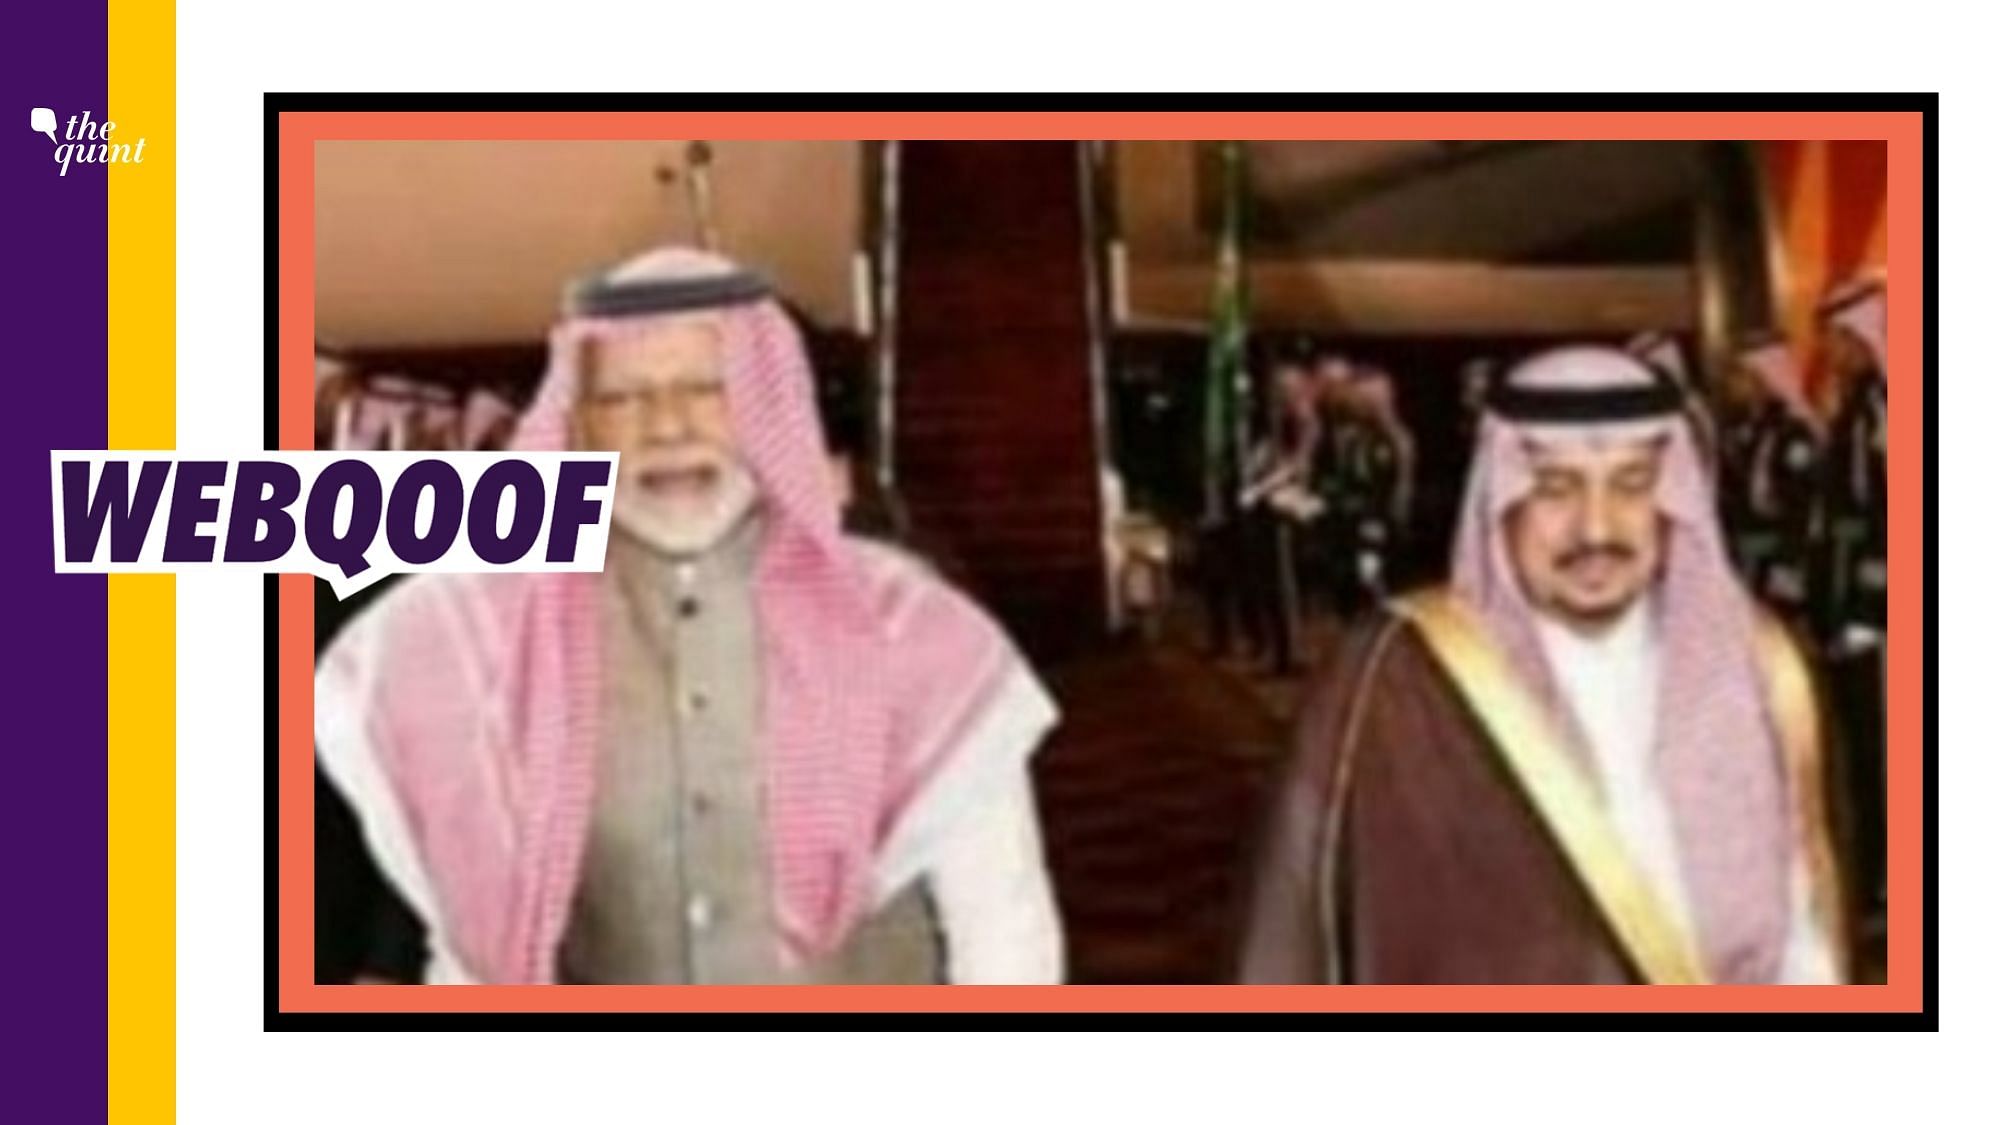 An image on social media falsely claimed that PM Narendra Modi wore Saudi Arabia’s traditional headdress during his visit.